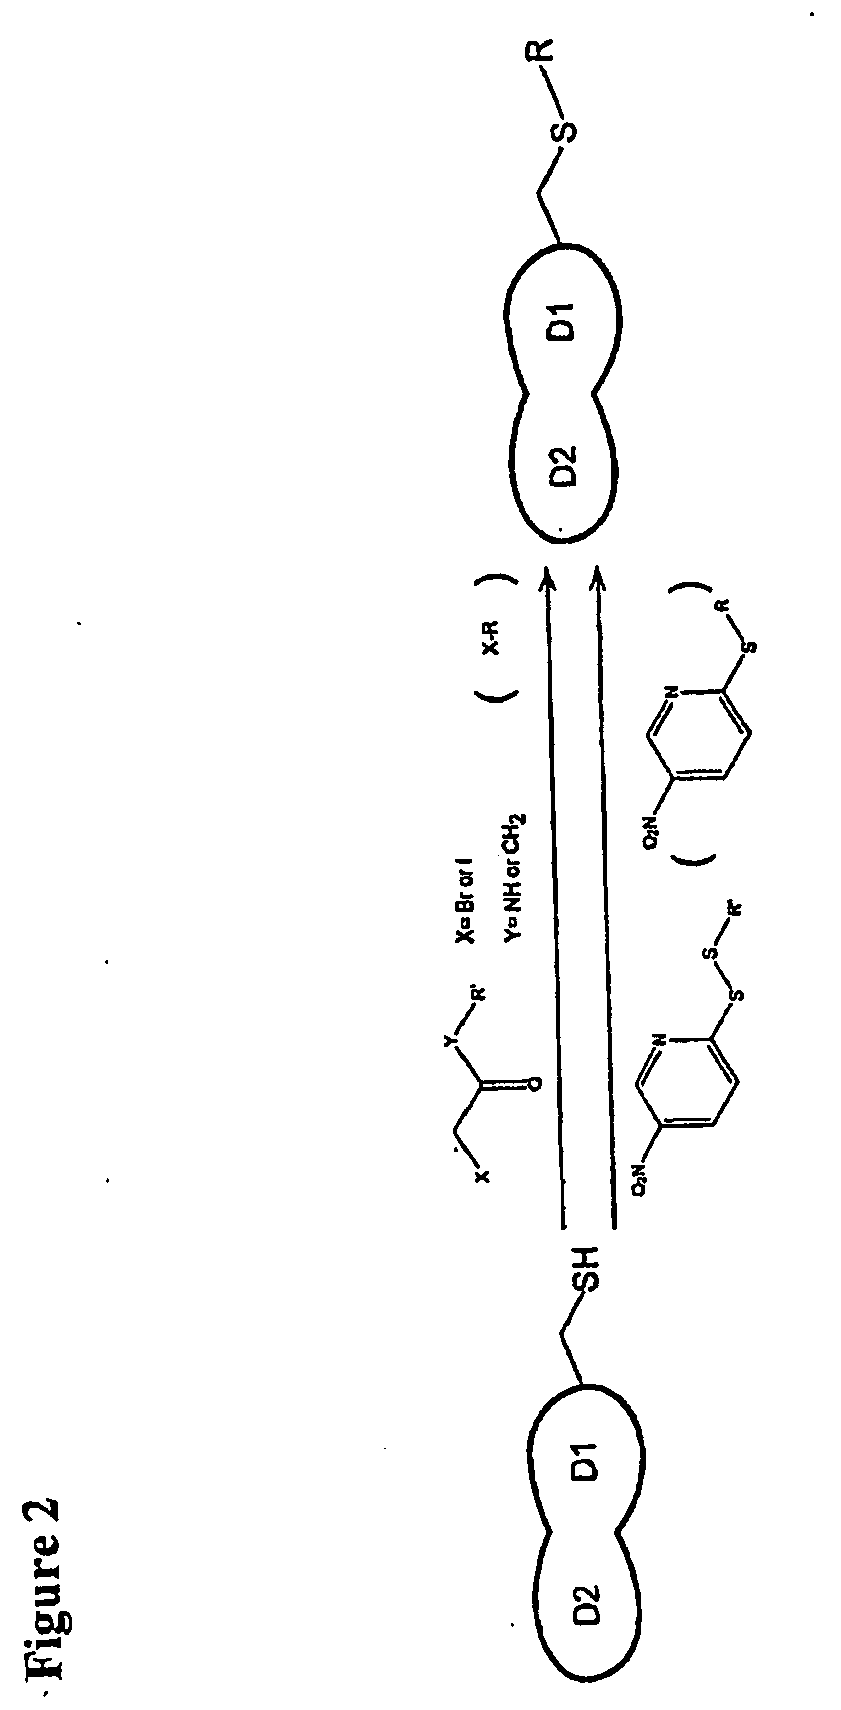 Chemically Derivatized CD4 and Uses Thereof